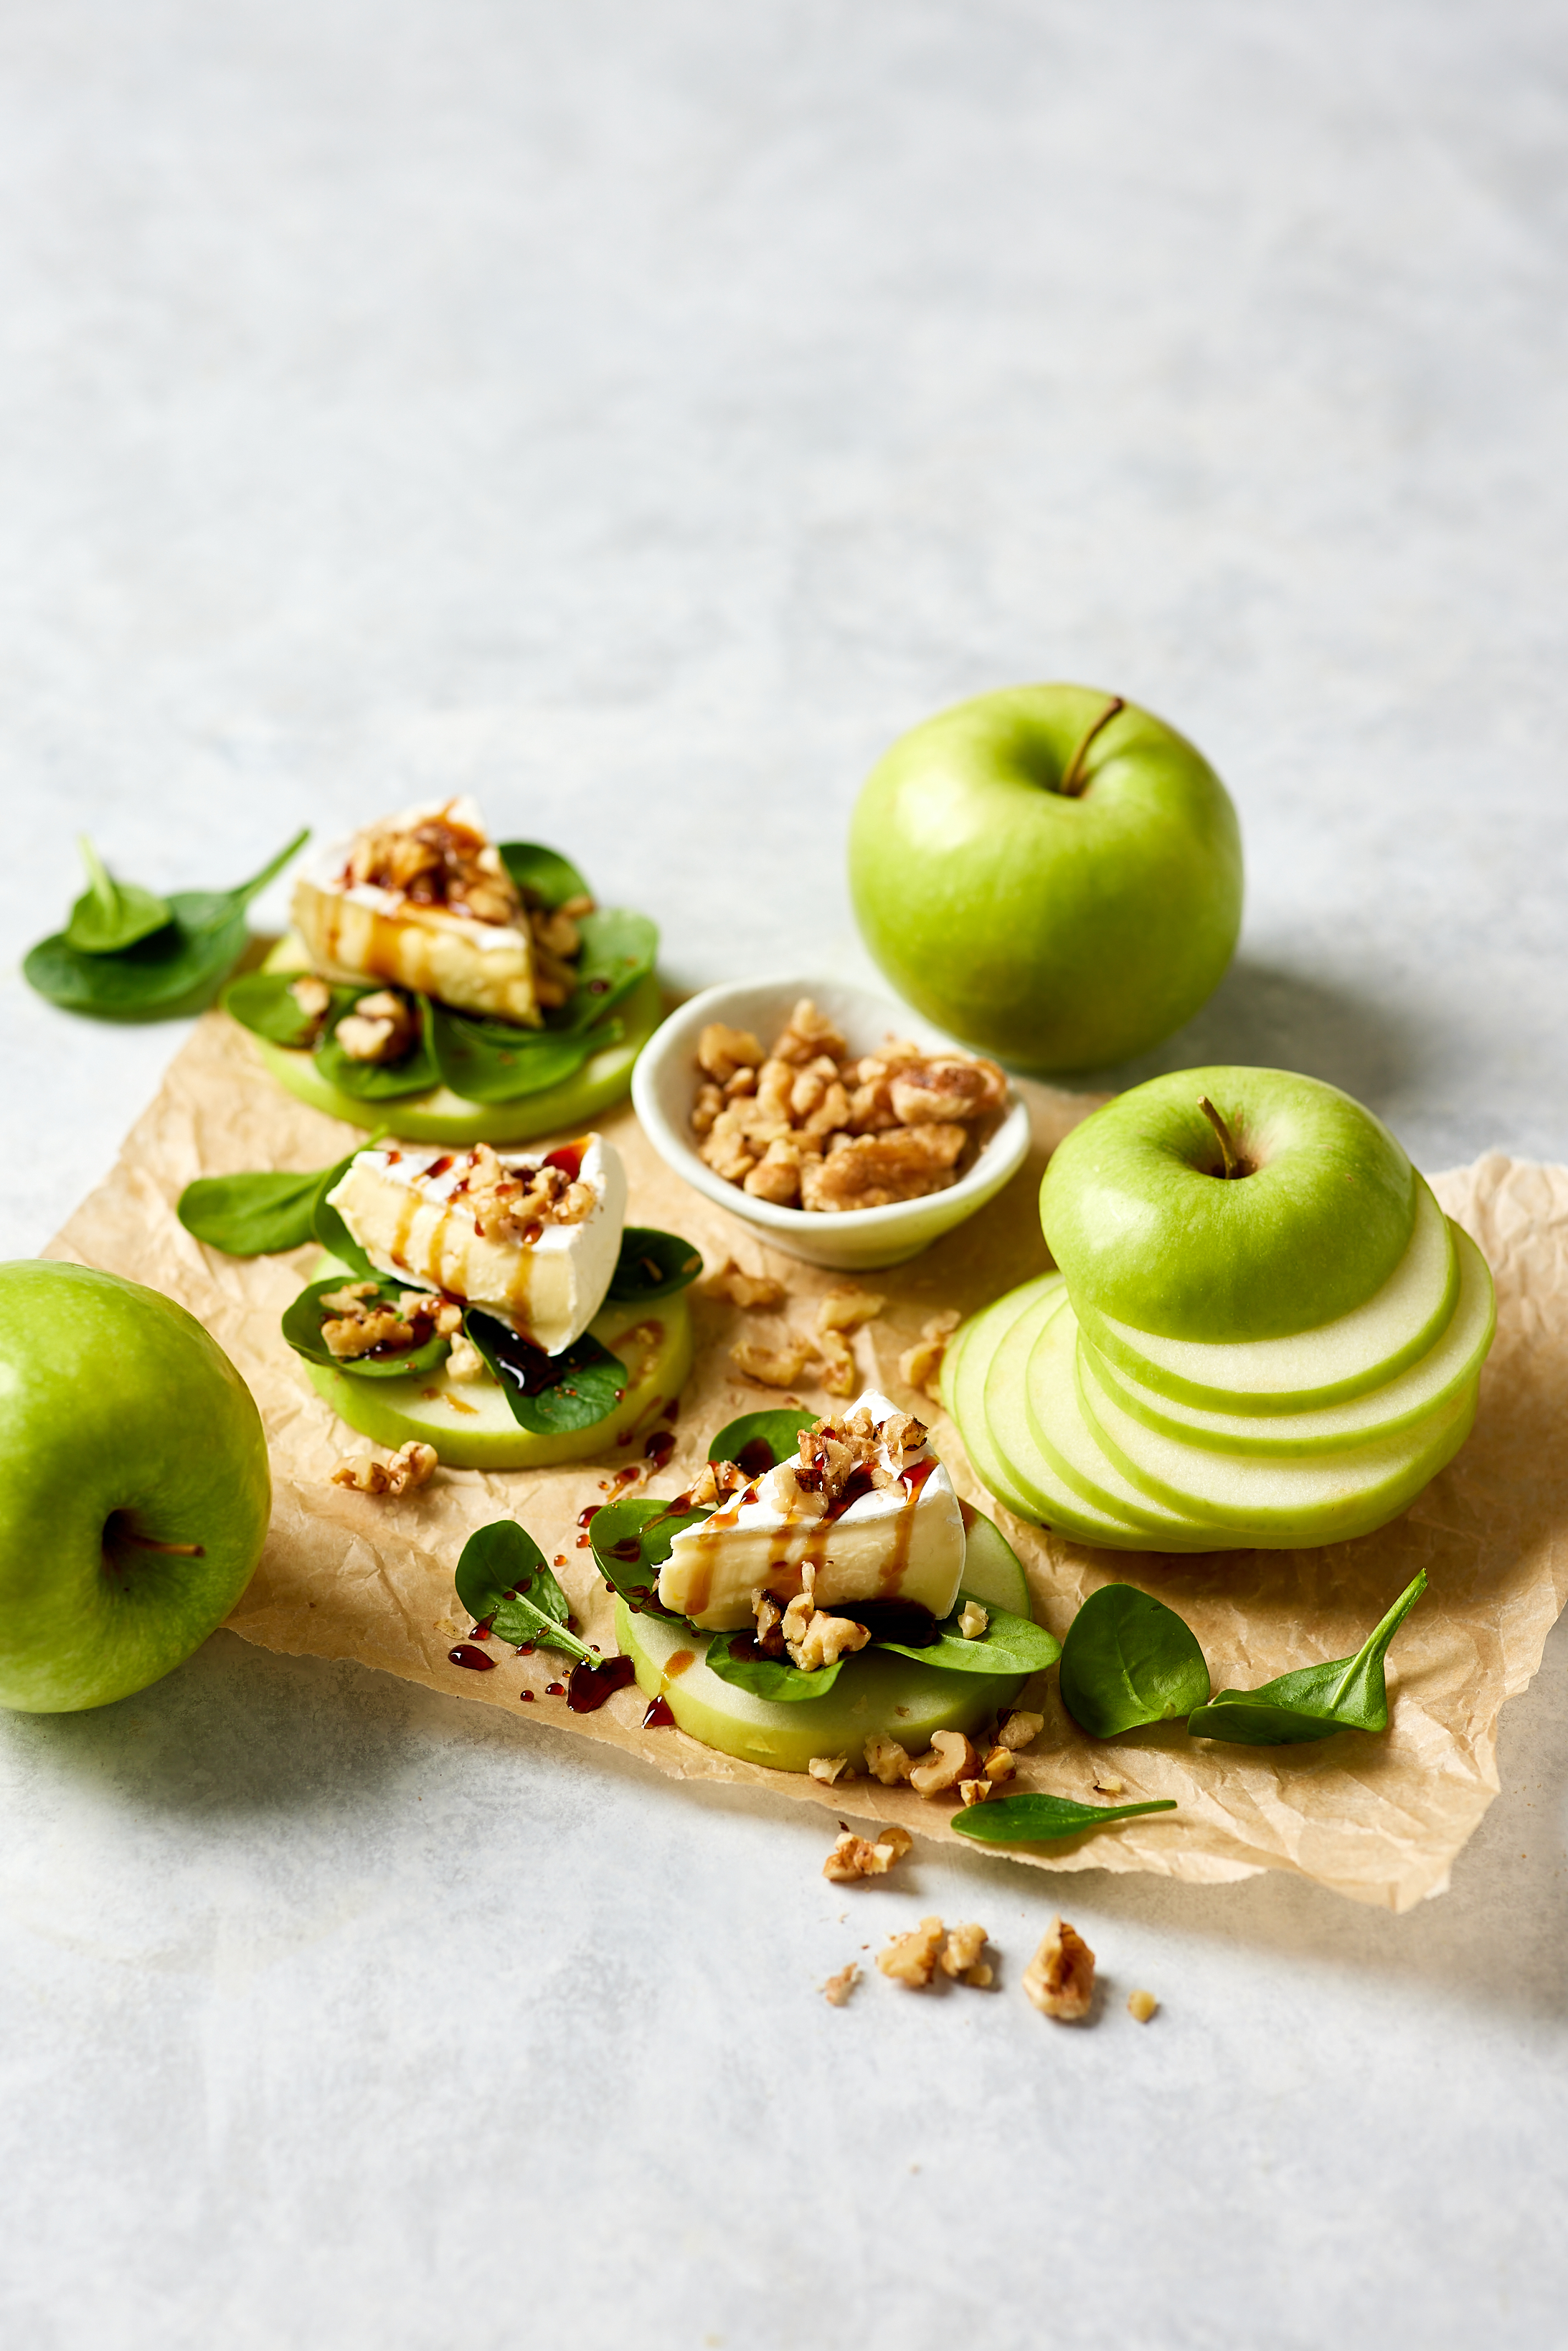 Apple Bites: Brie, Baby Spinach & Walnuts